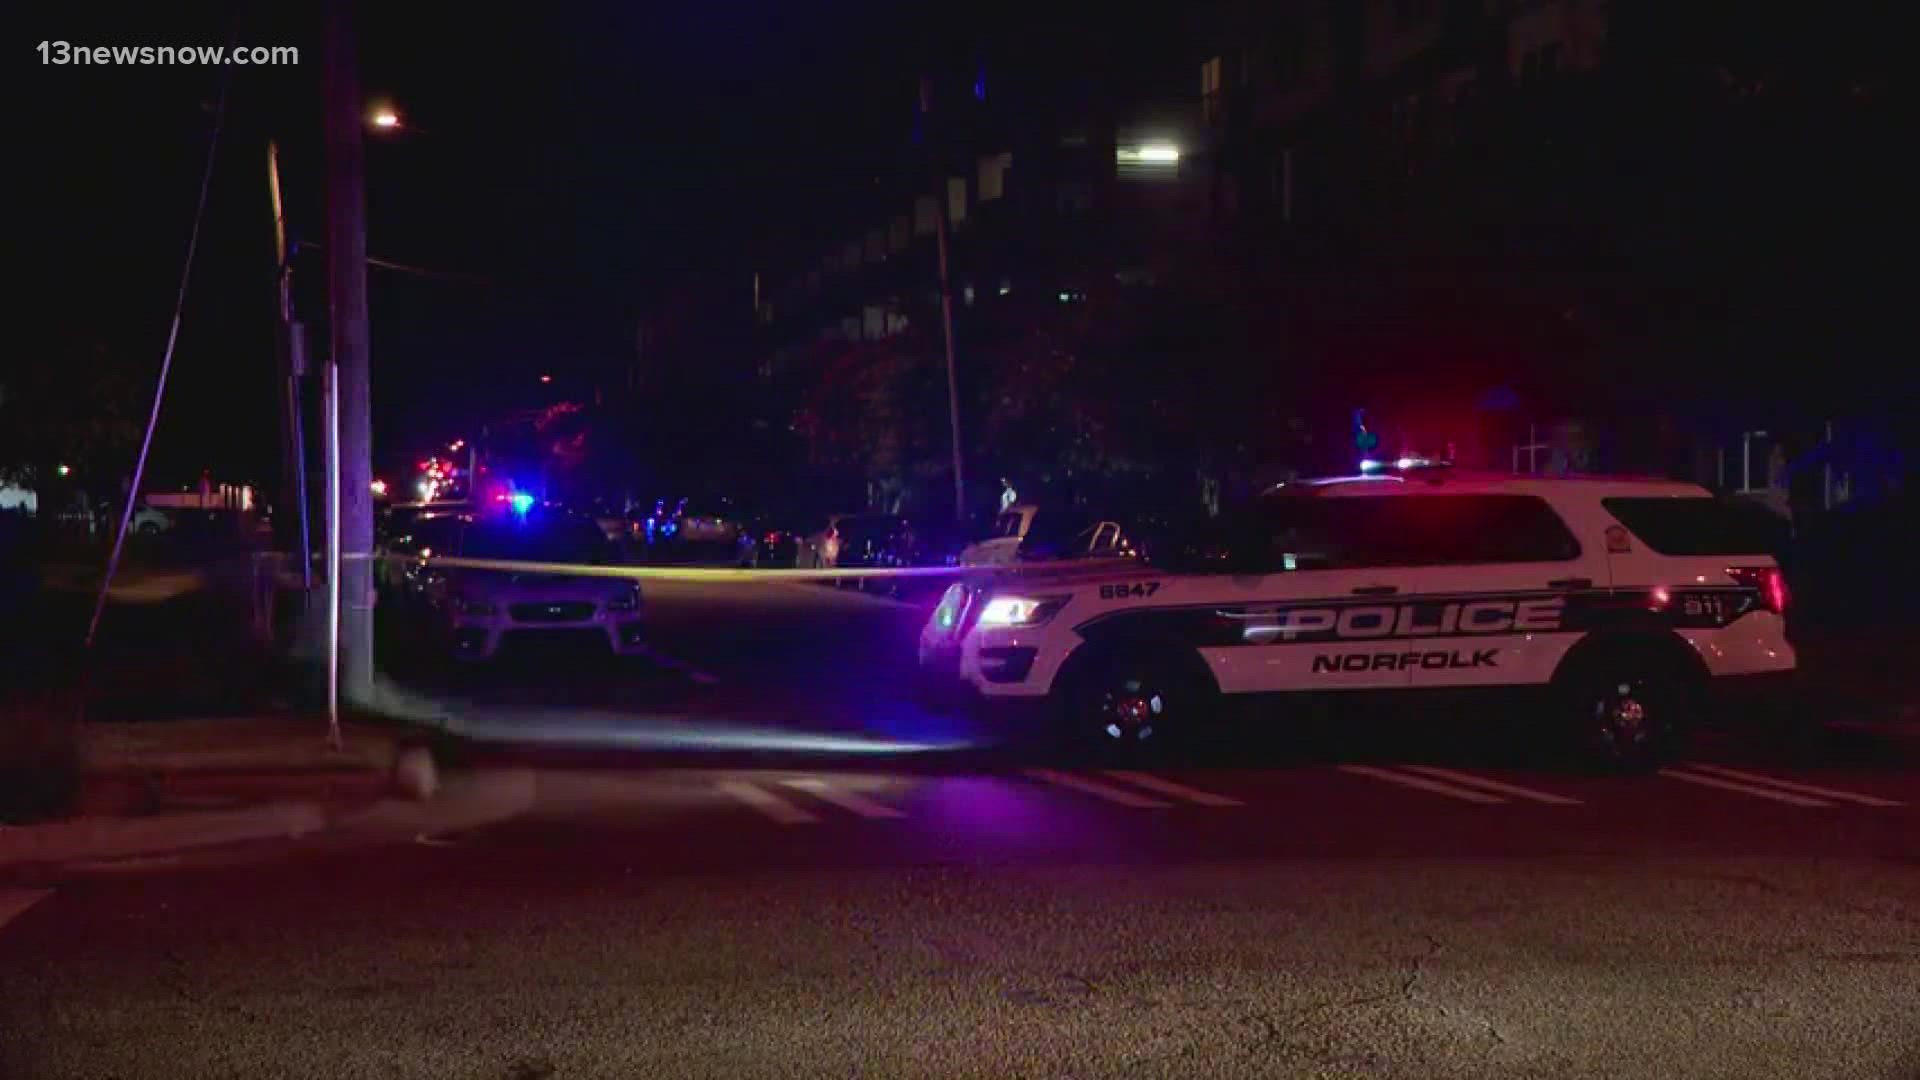 One person has died following a shooting near ODU Friday night.